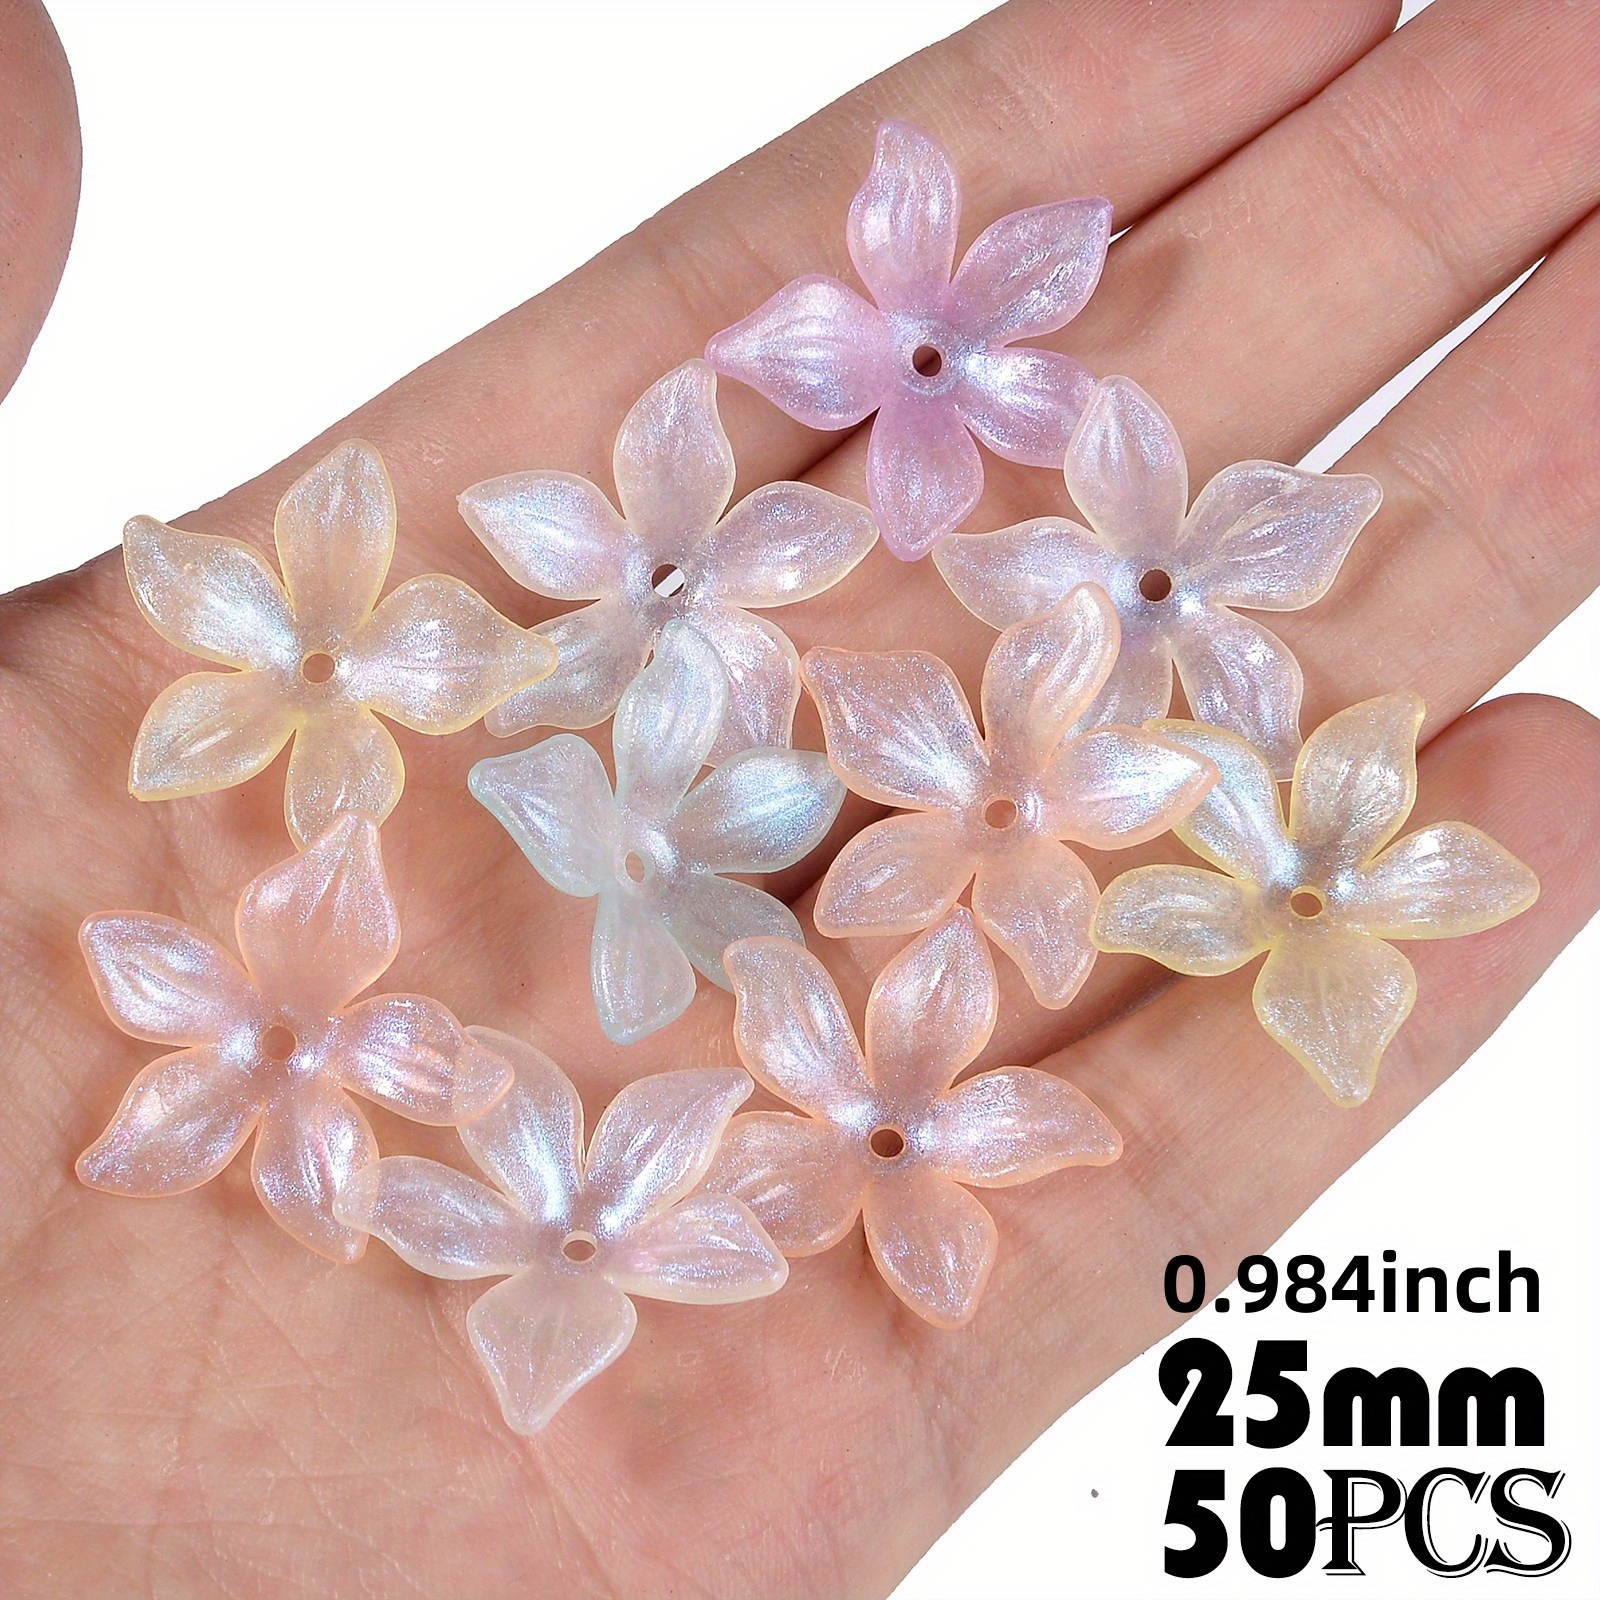 Large Pink Lucite Flower Beads, Plastic Acrylic Bead Caps, 30mm, Pack of 10  Light Pink Beads for Jewelry Making 